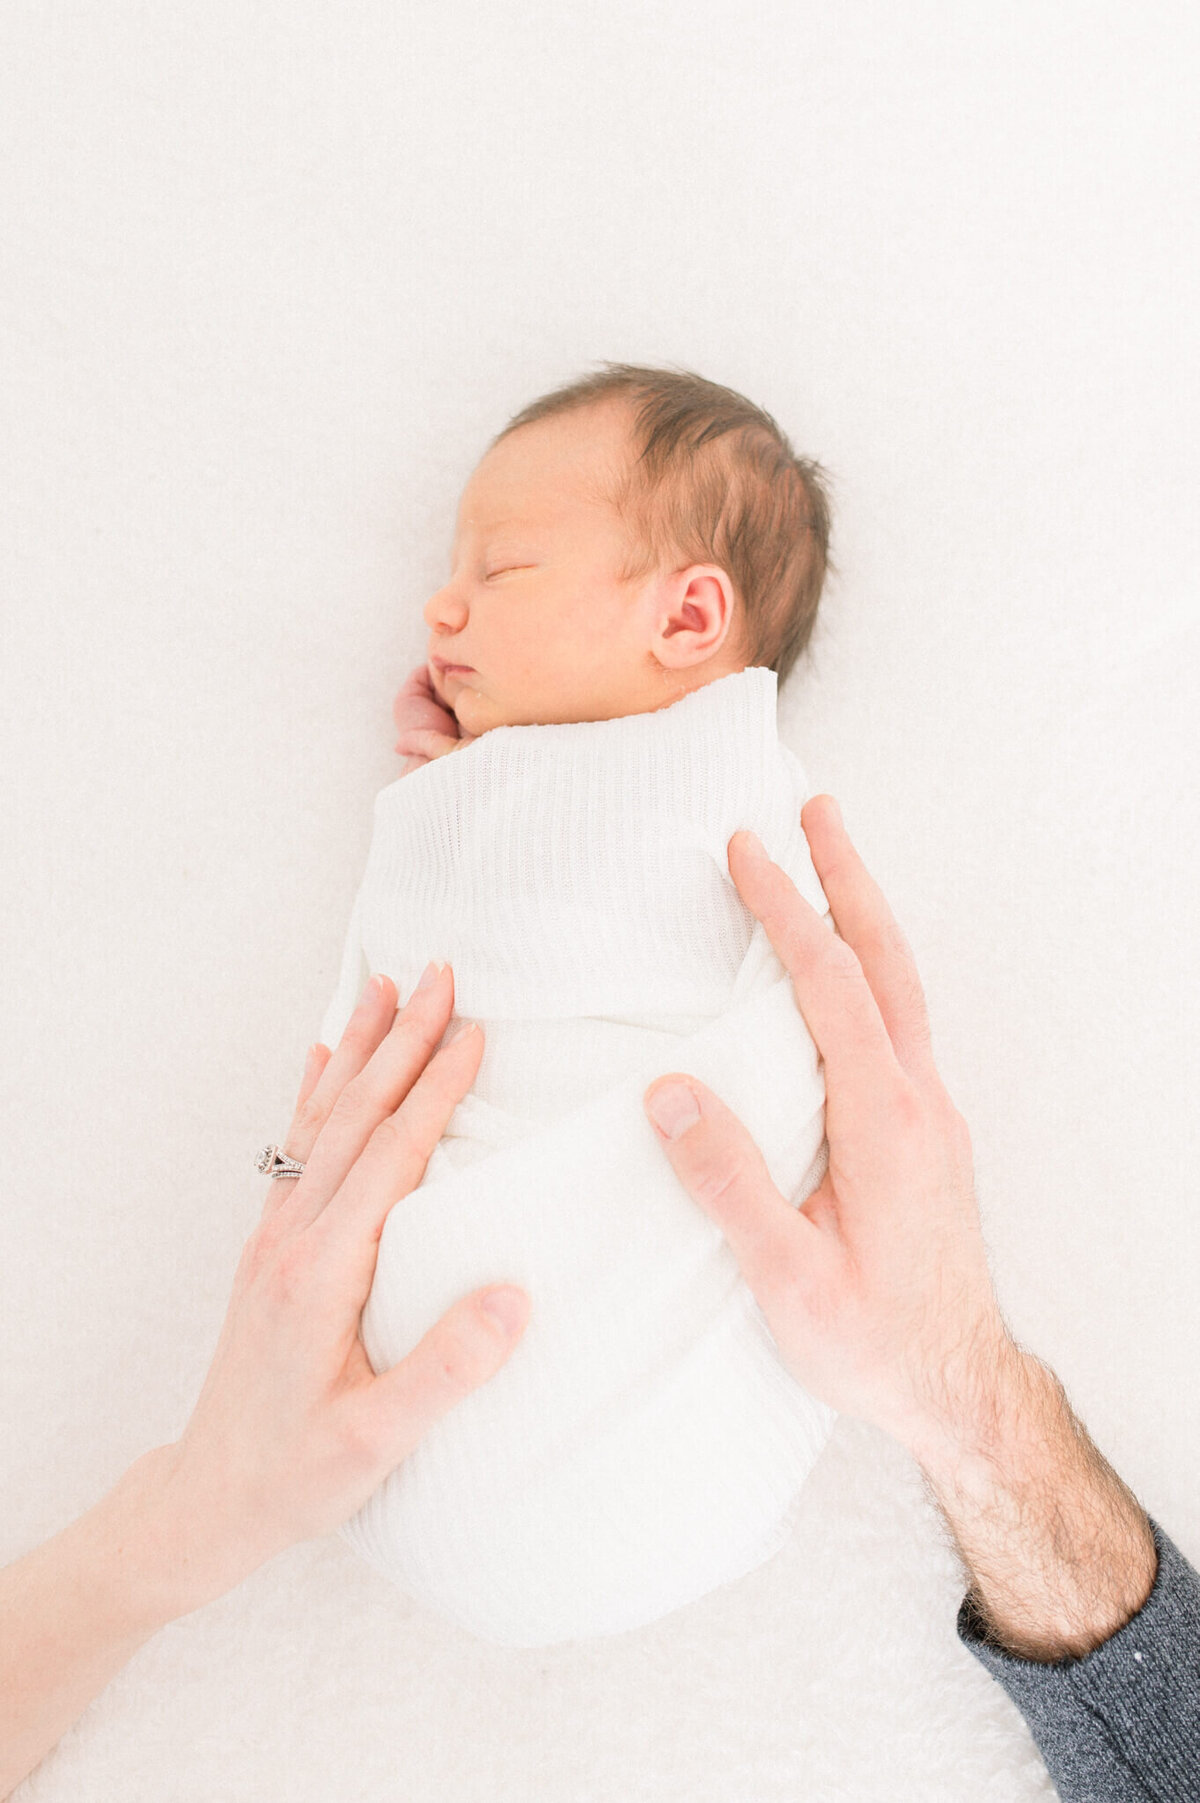 Parents hands in image toughing each side of baby while newborn sleeps captured by Niagara newborn photographer